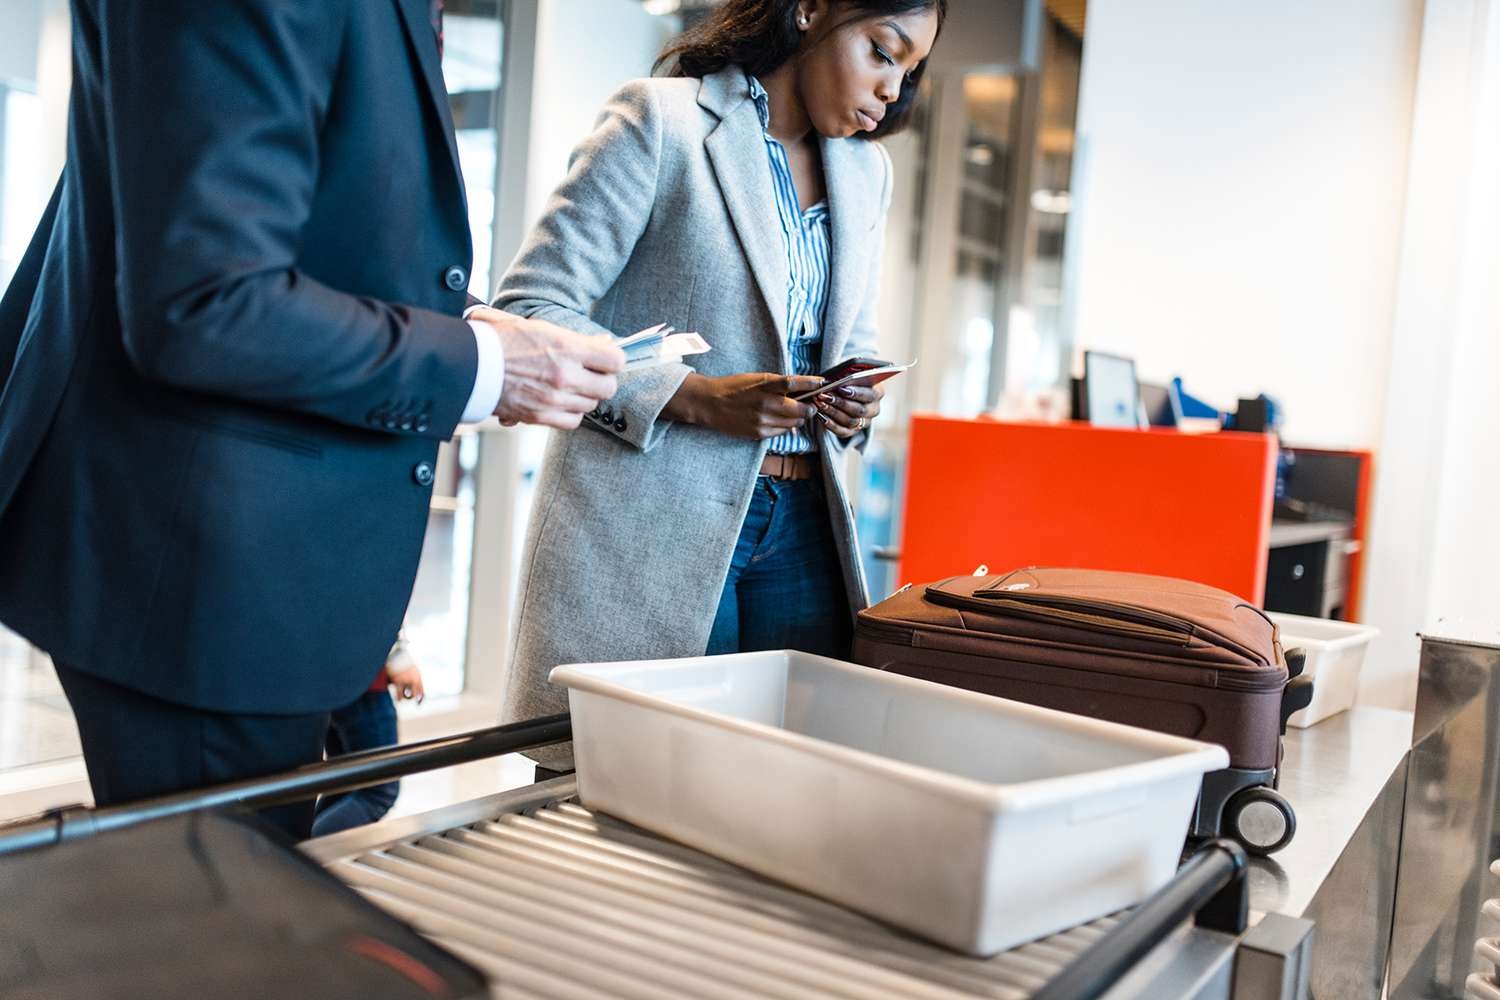 7 Mistakes to Avoid When Going Through Airport Security